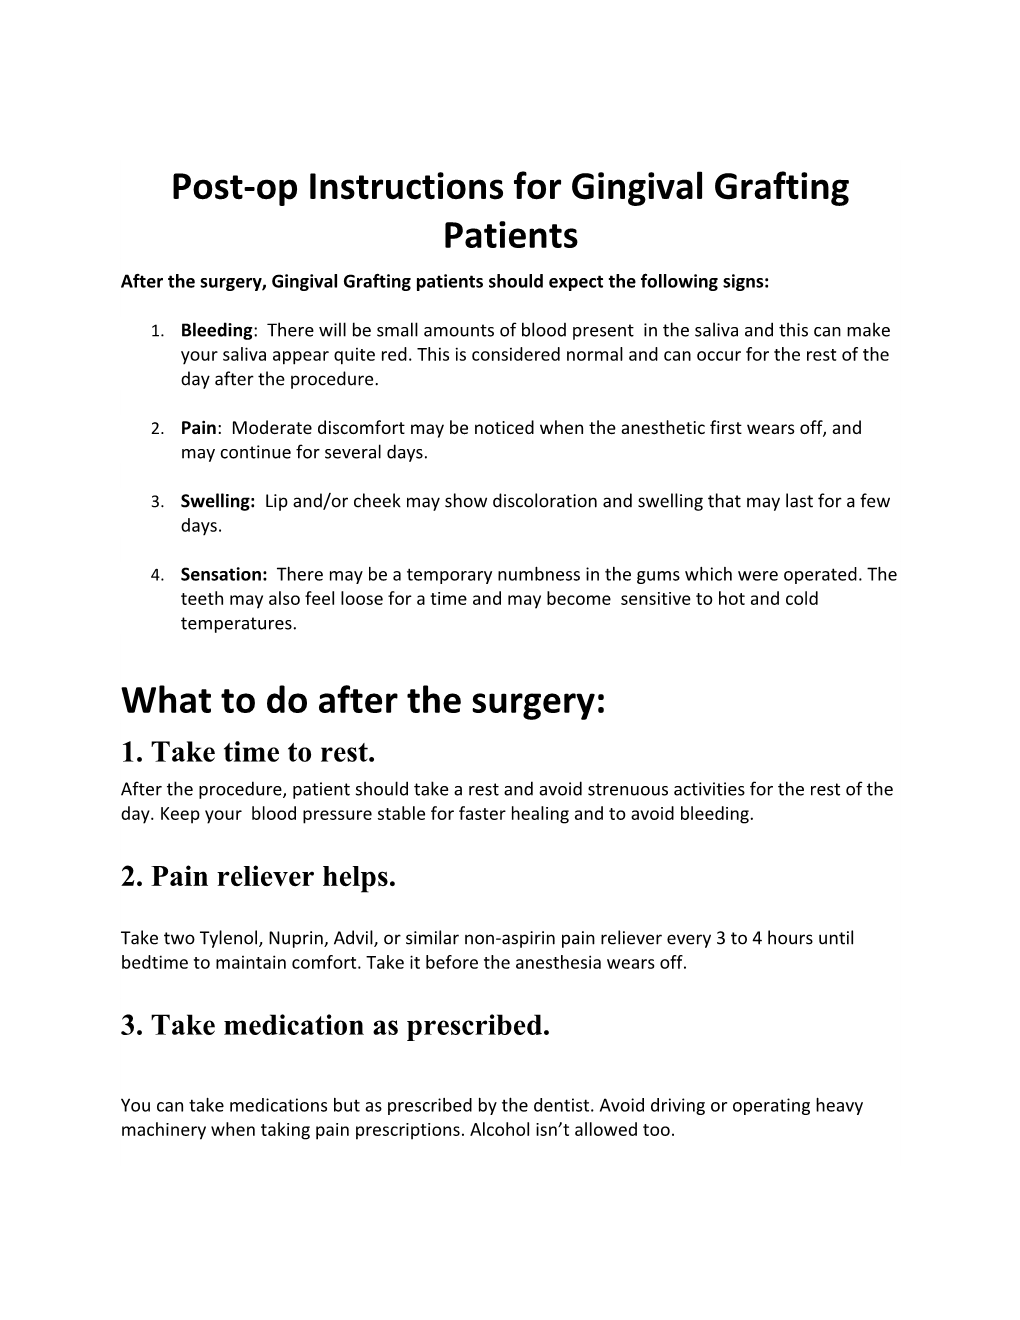 Post-Op Instructions for Gingival Grafting Patients